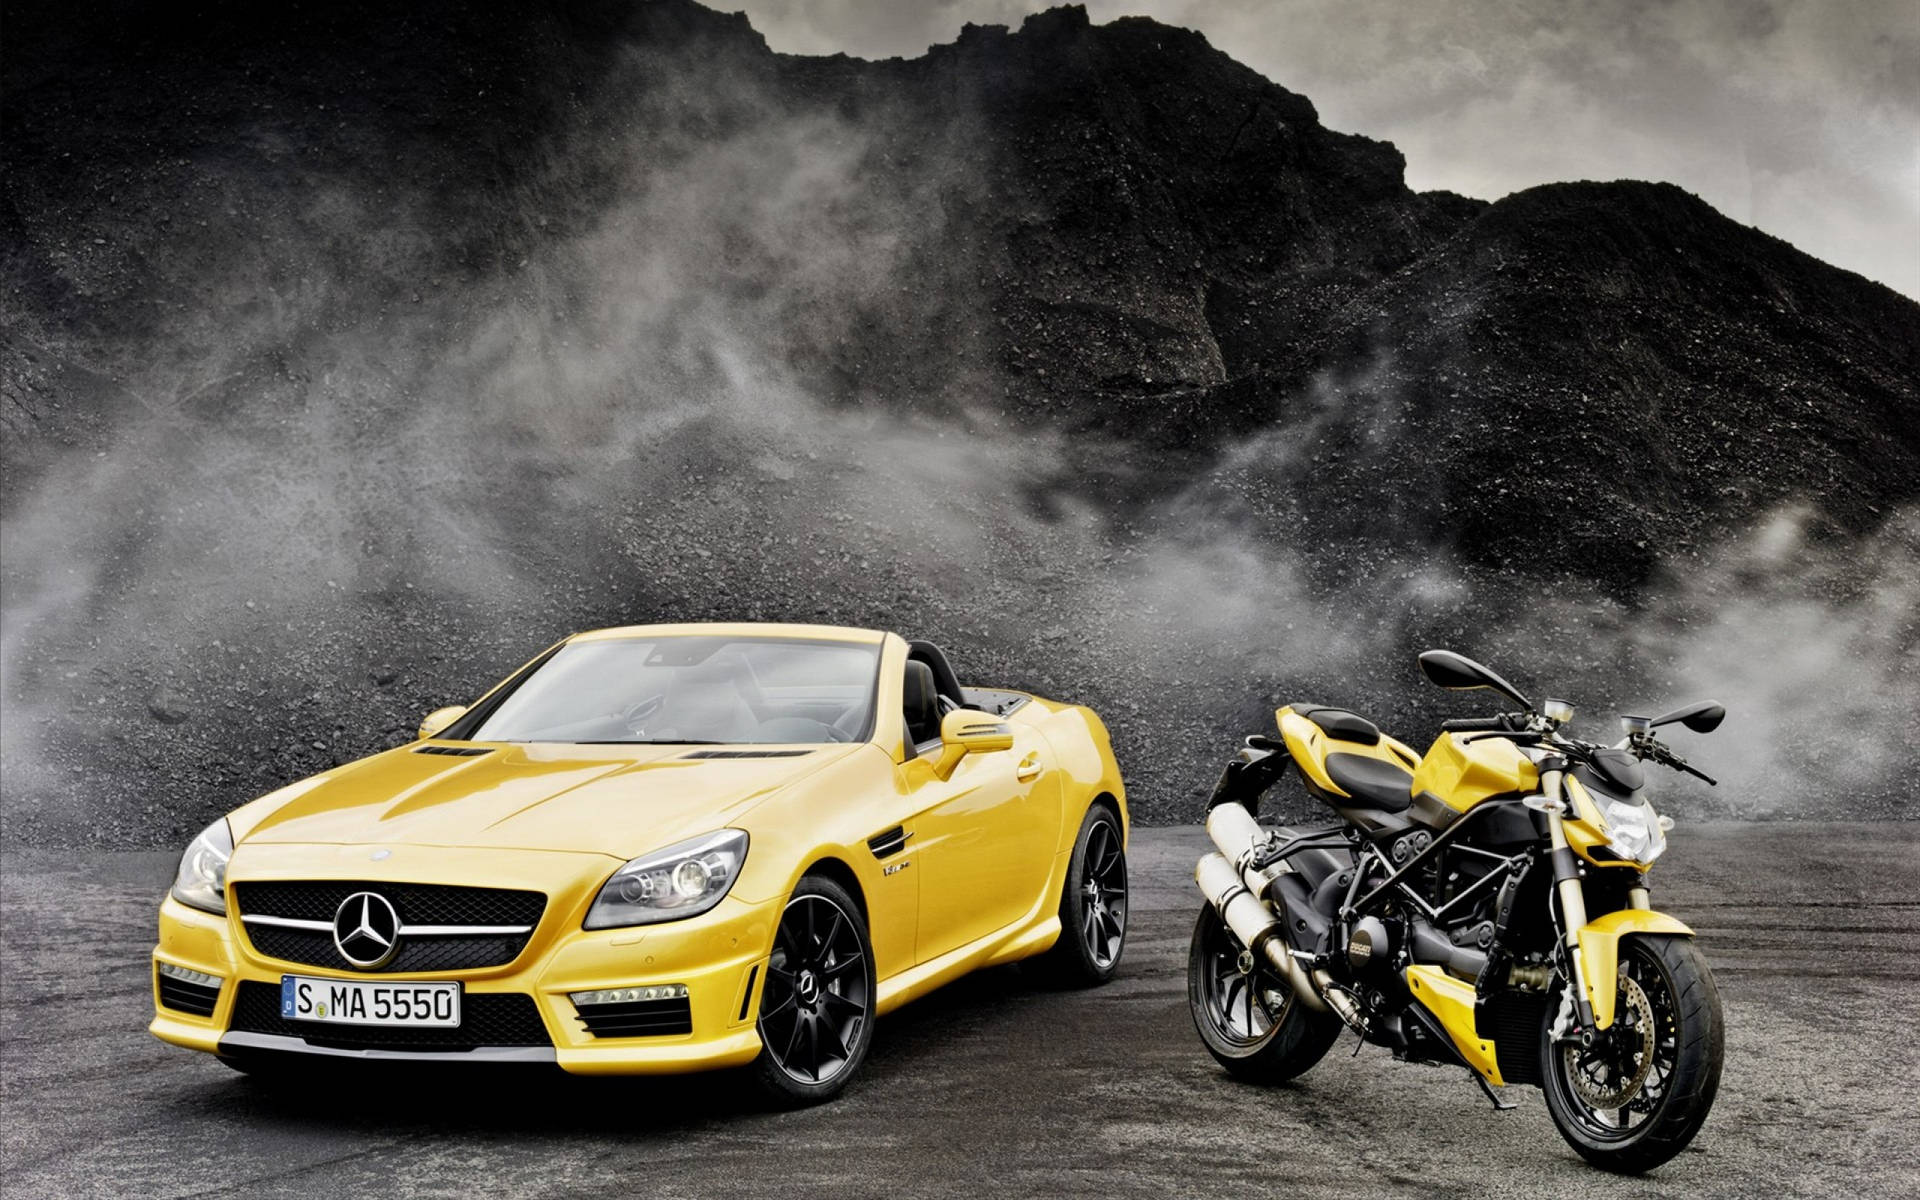 Caption: Elegance in Motion: Yellow Convertible Luxury Car Wallpaper